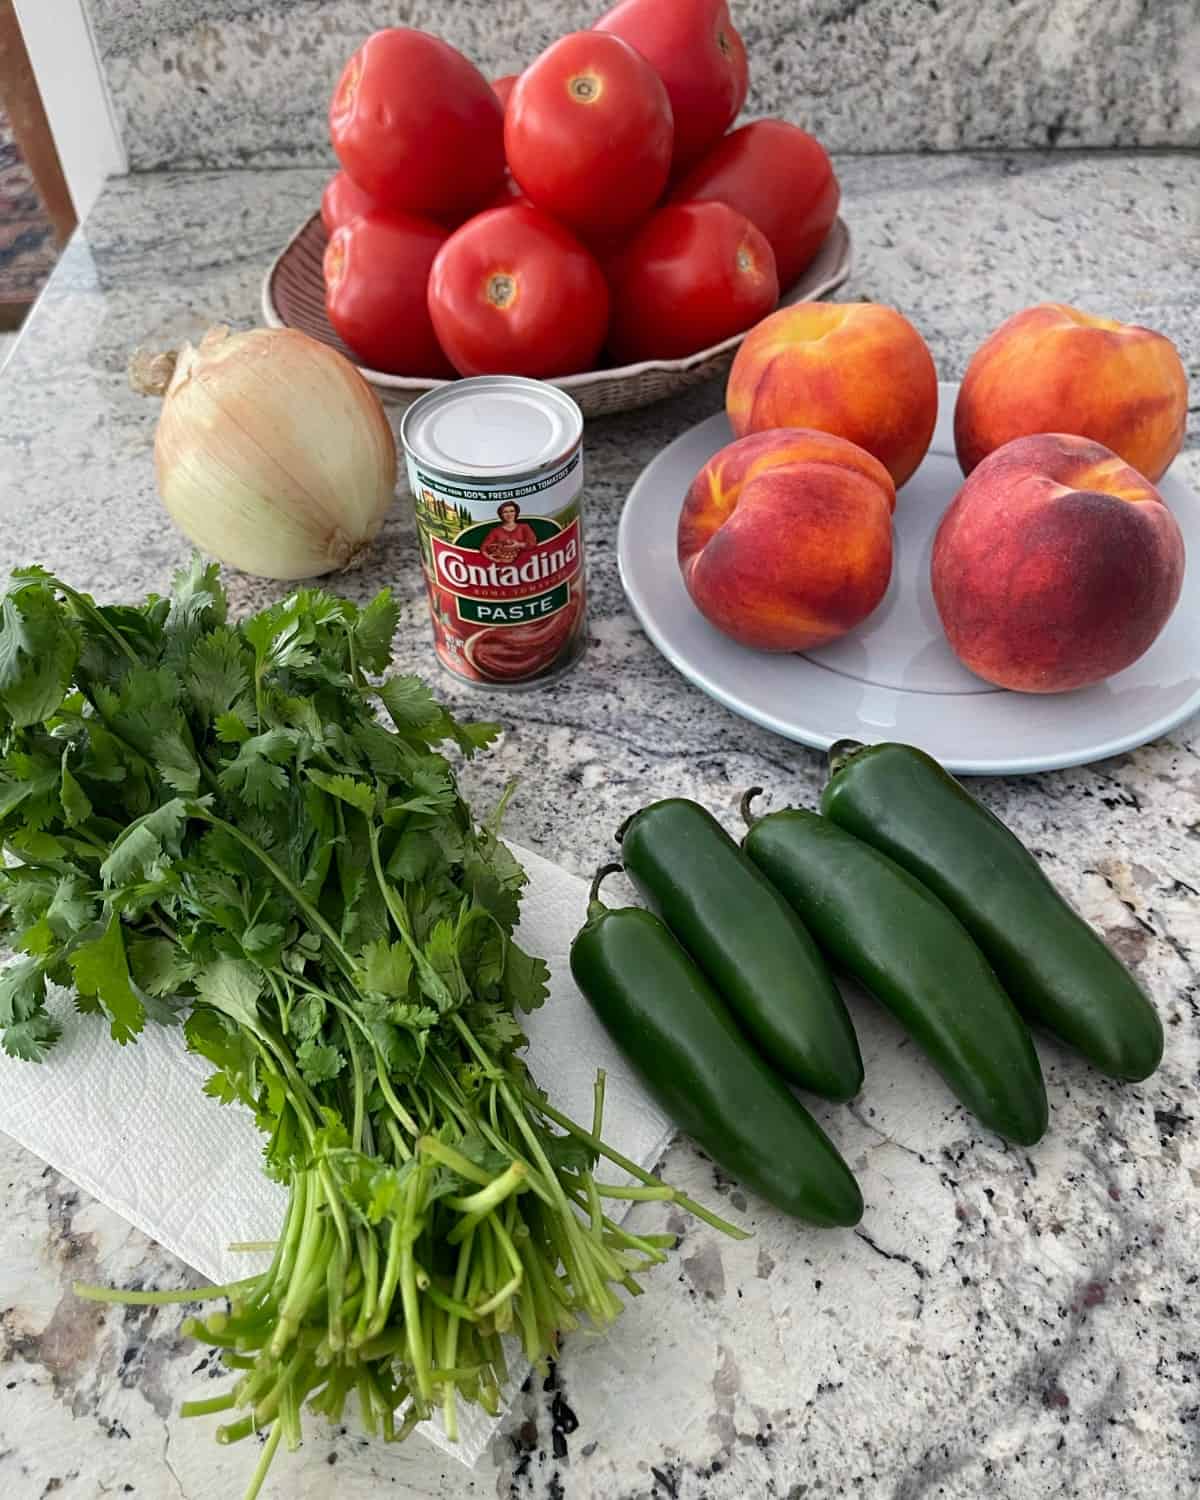 Ingredients including Roma tomatoes, fresh peaches, jalapeño peppers, bunch of cilantro, onion and can of tomato paste.